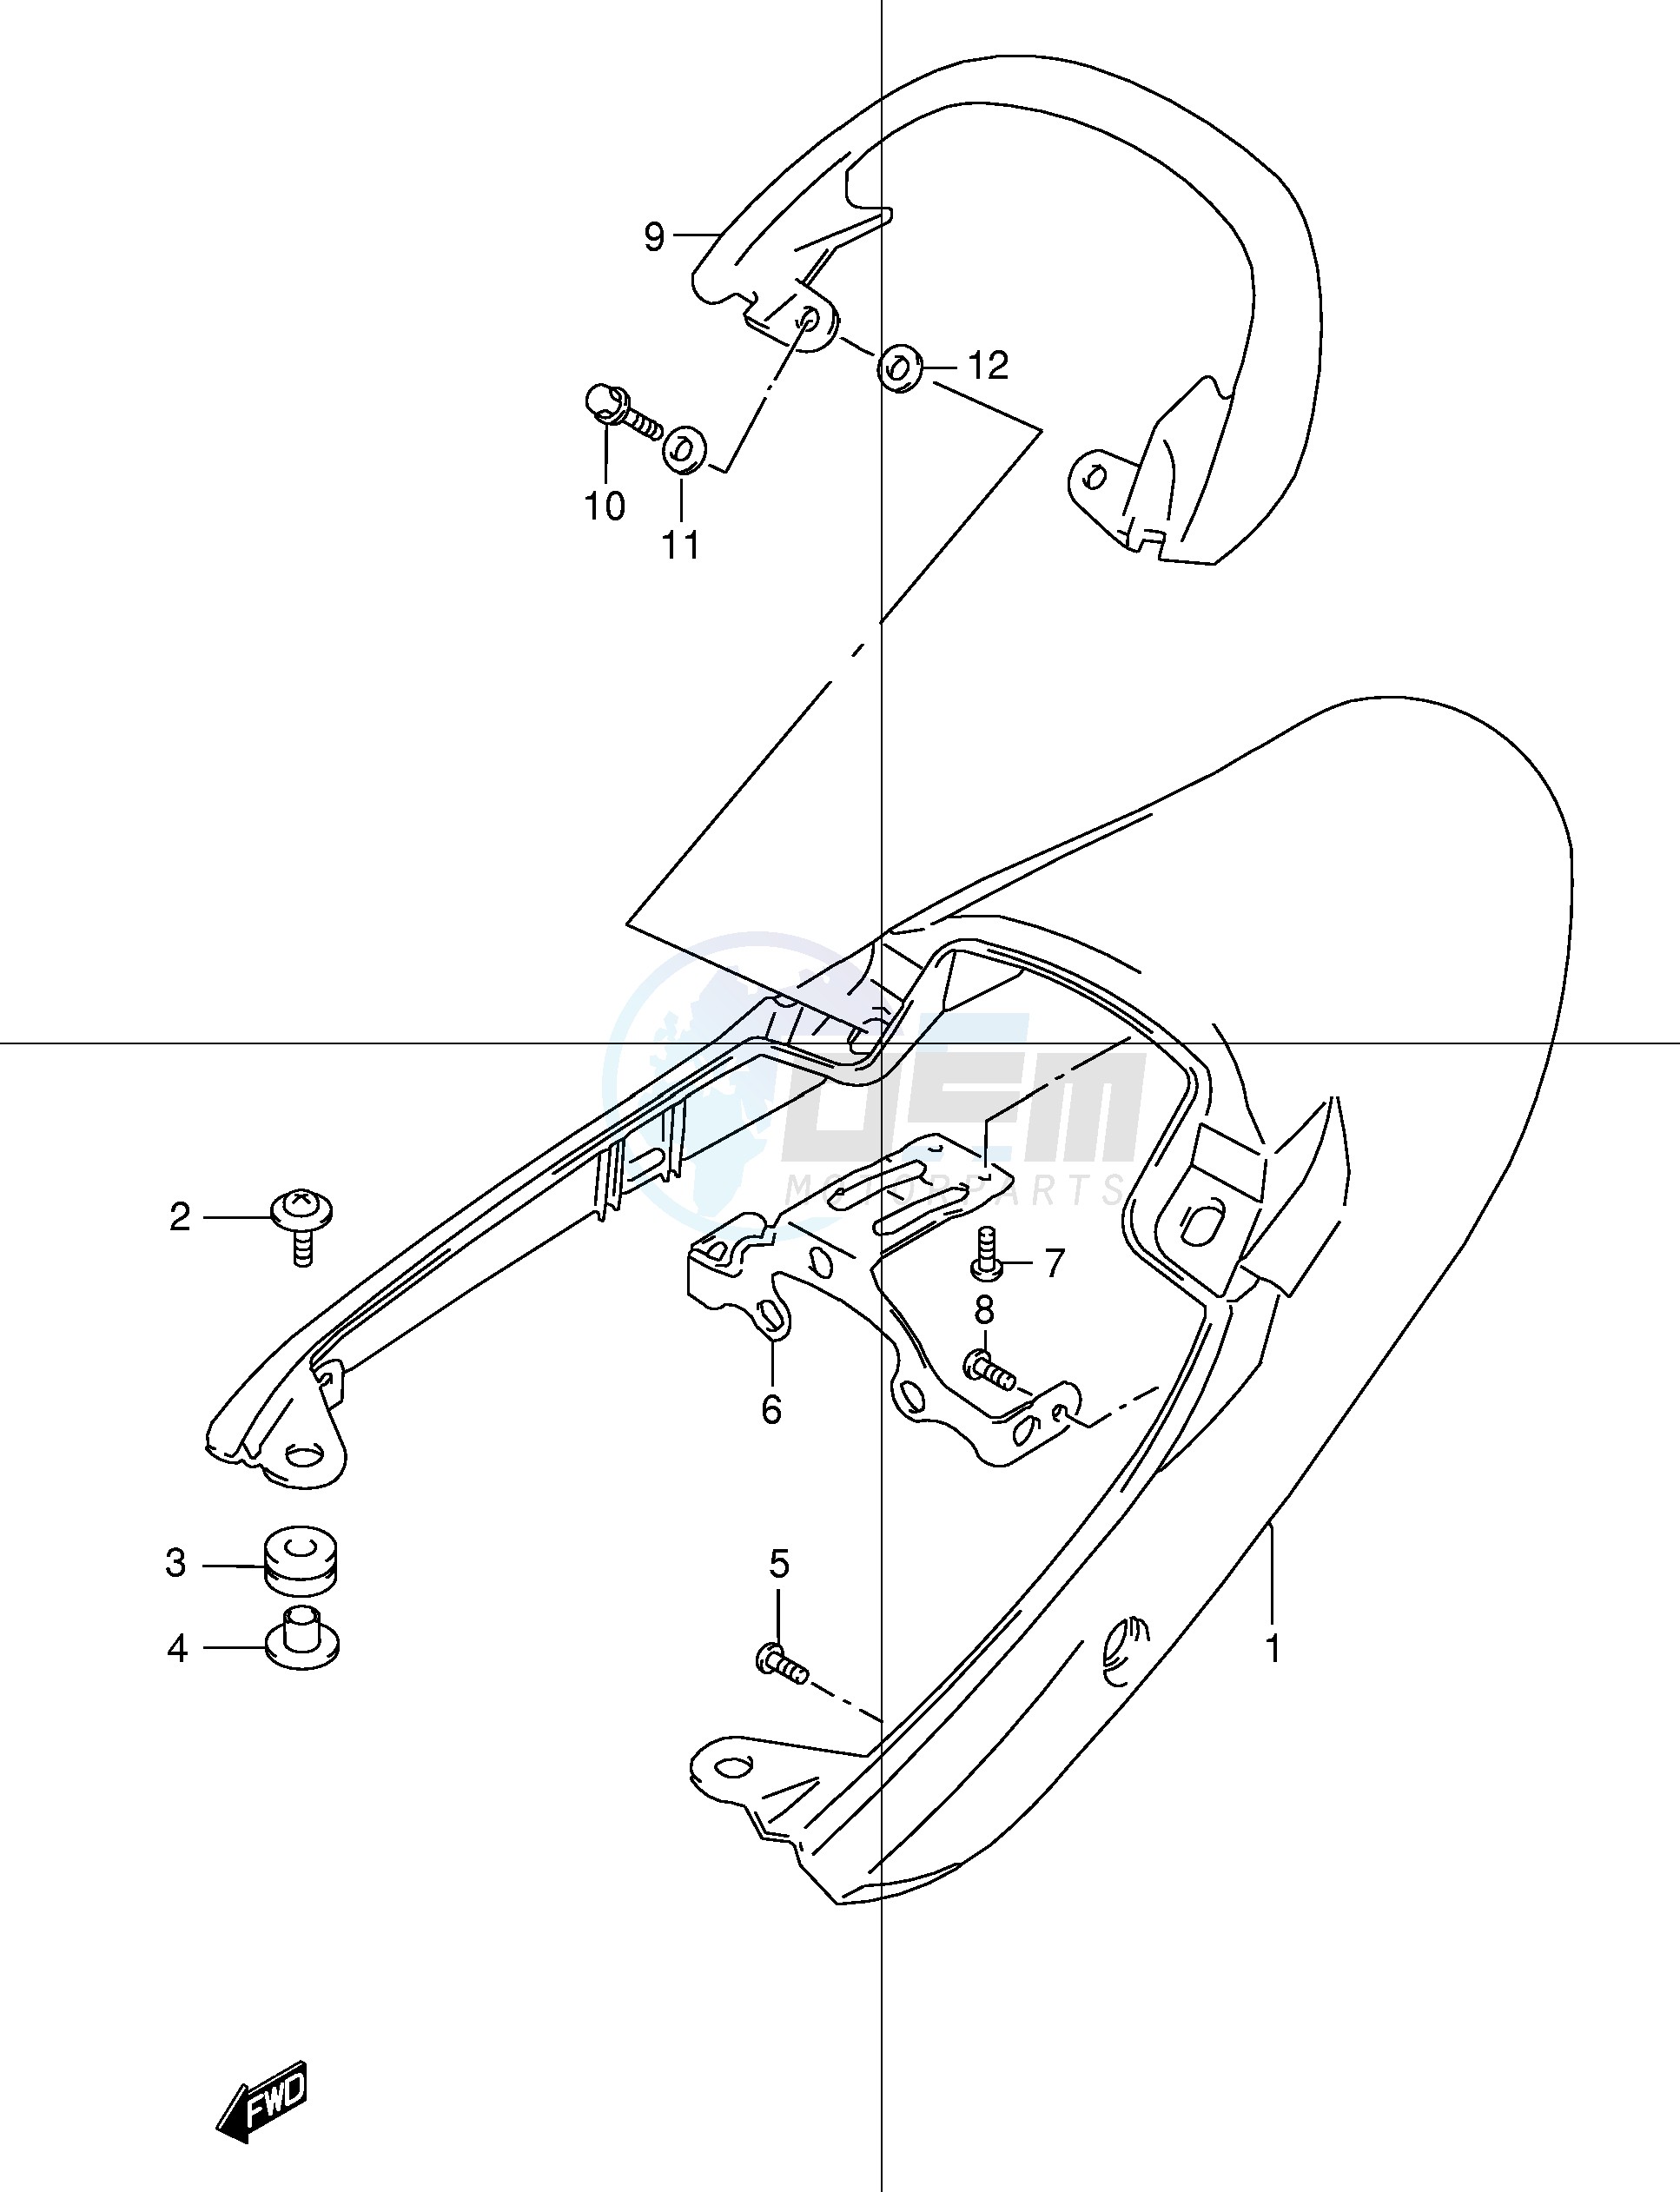 SEAT TAIL COVER blueprint